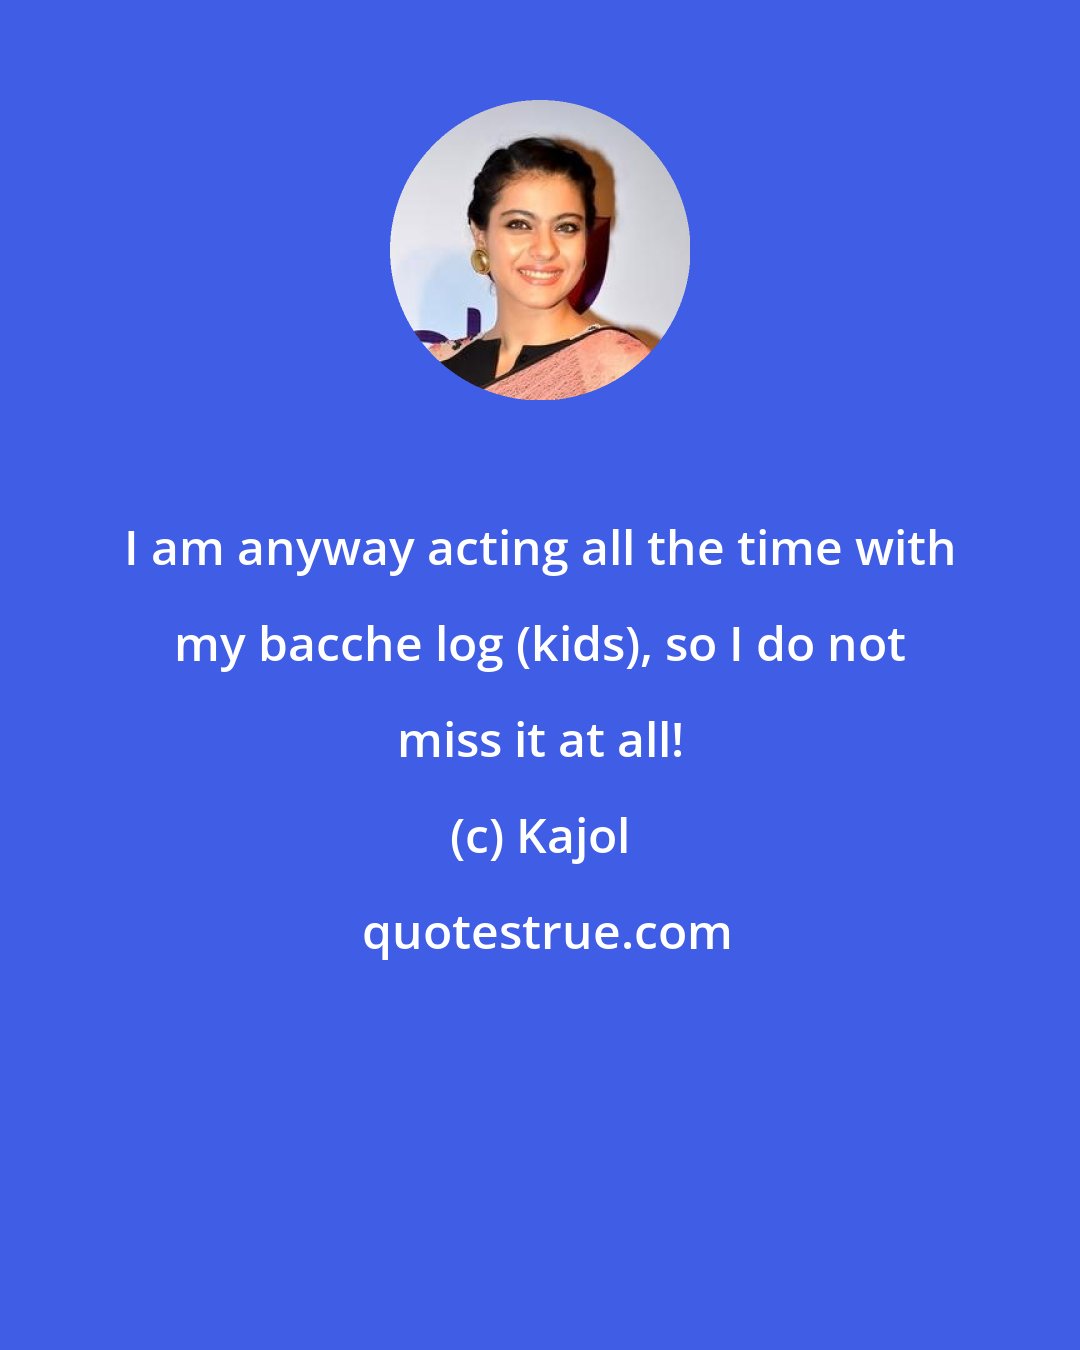 Kajol: I am anyway acting all the time with my bacche log (kids), so I do not miss it at all!